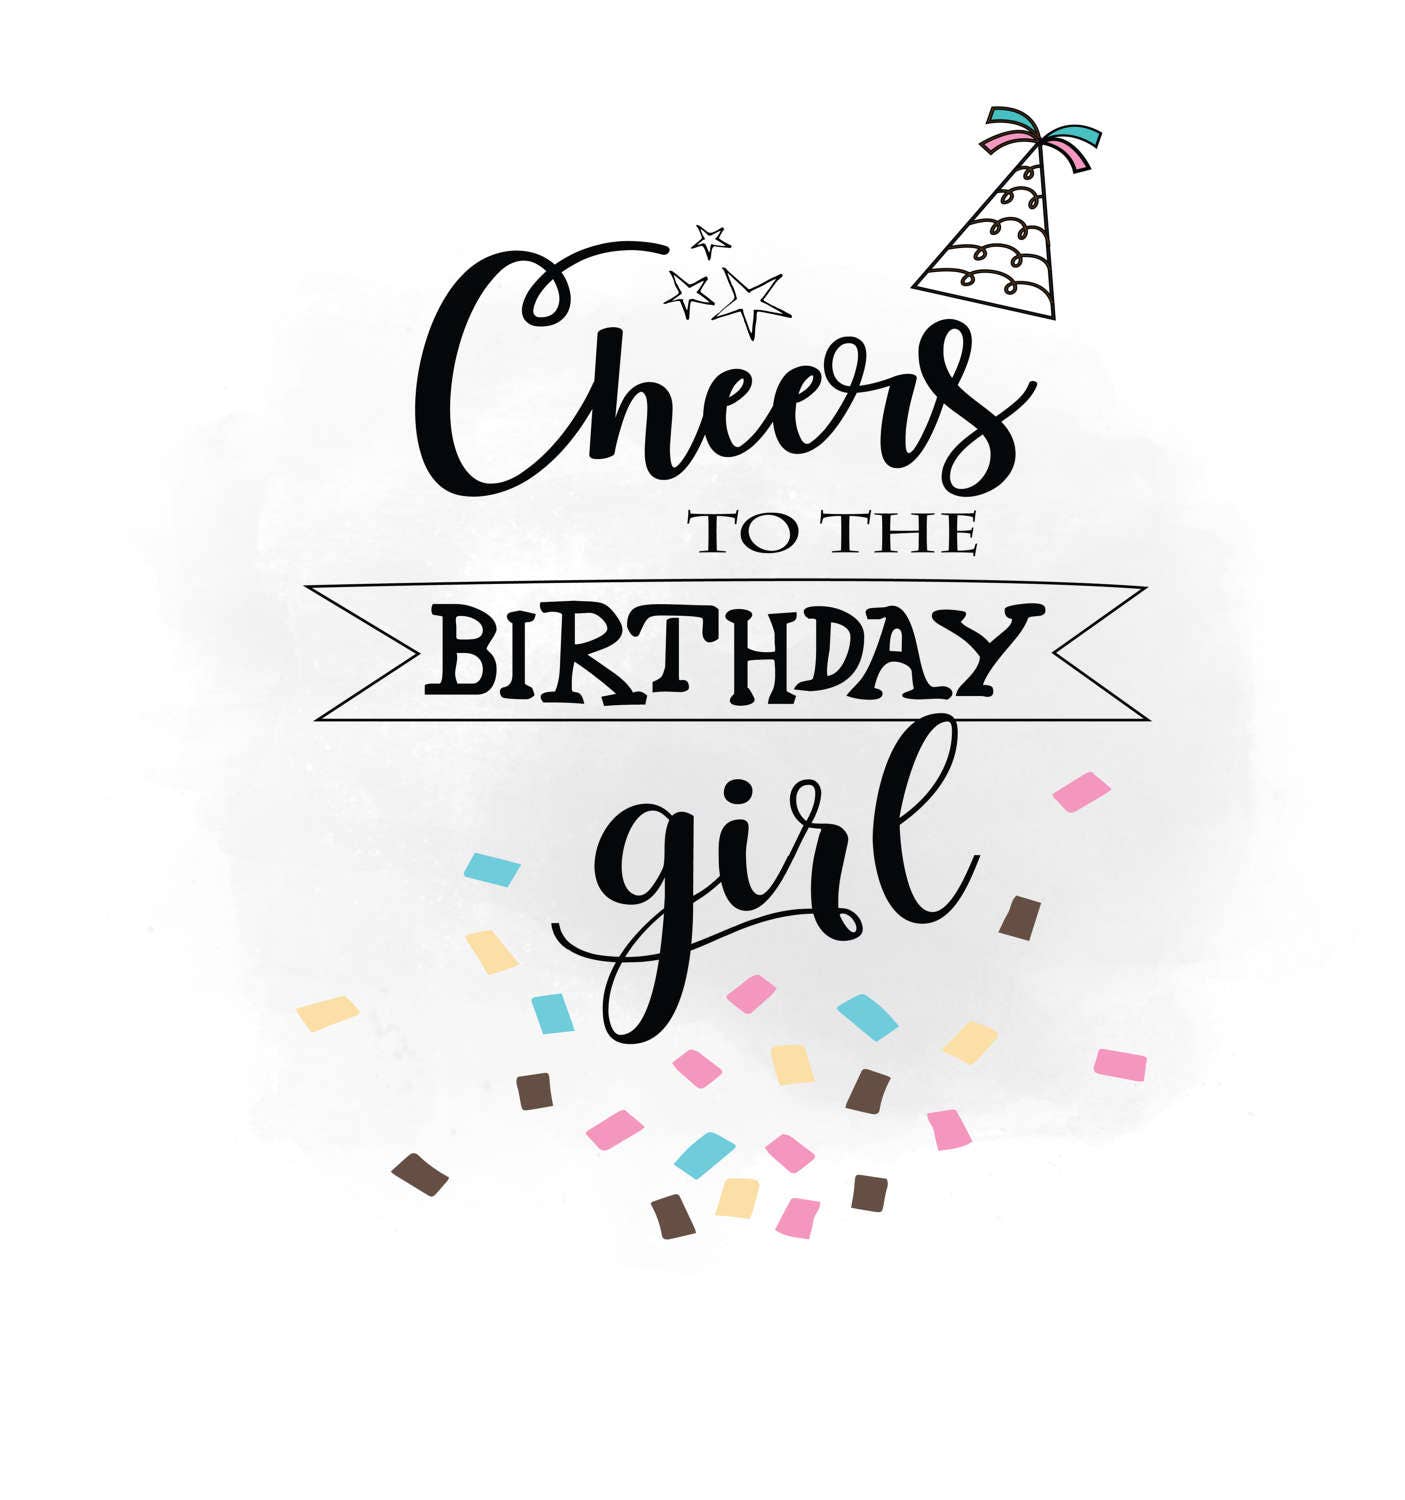 Download Cheers to Birthday girl SVG clipart, Birthday Quote ...